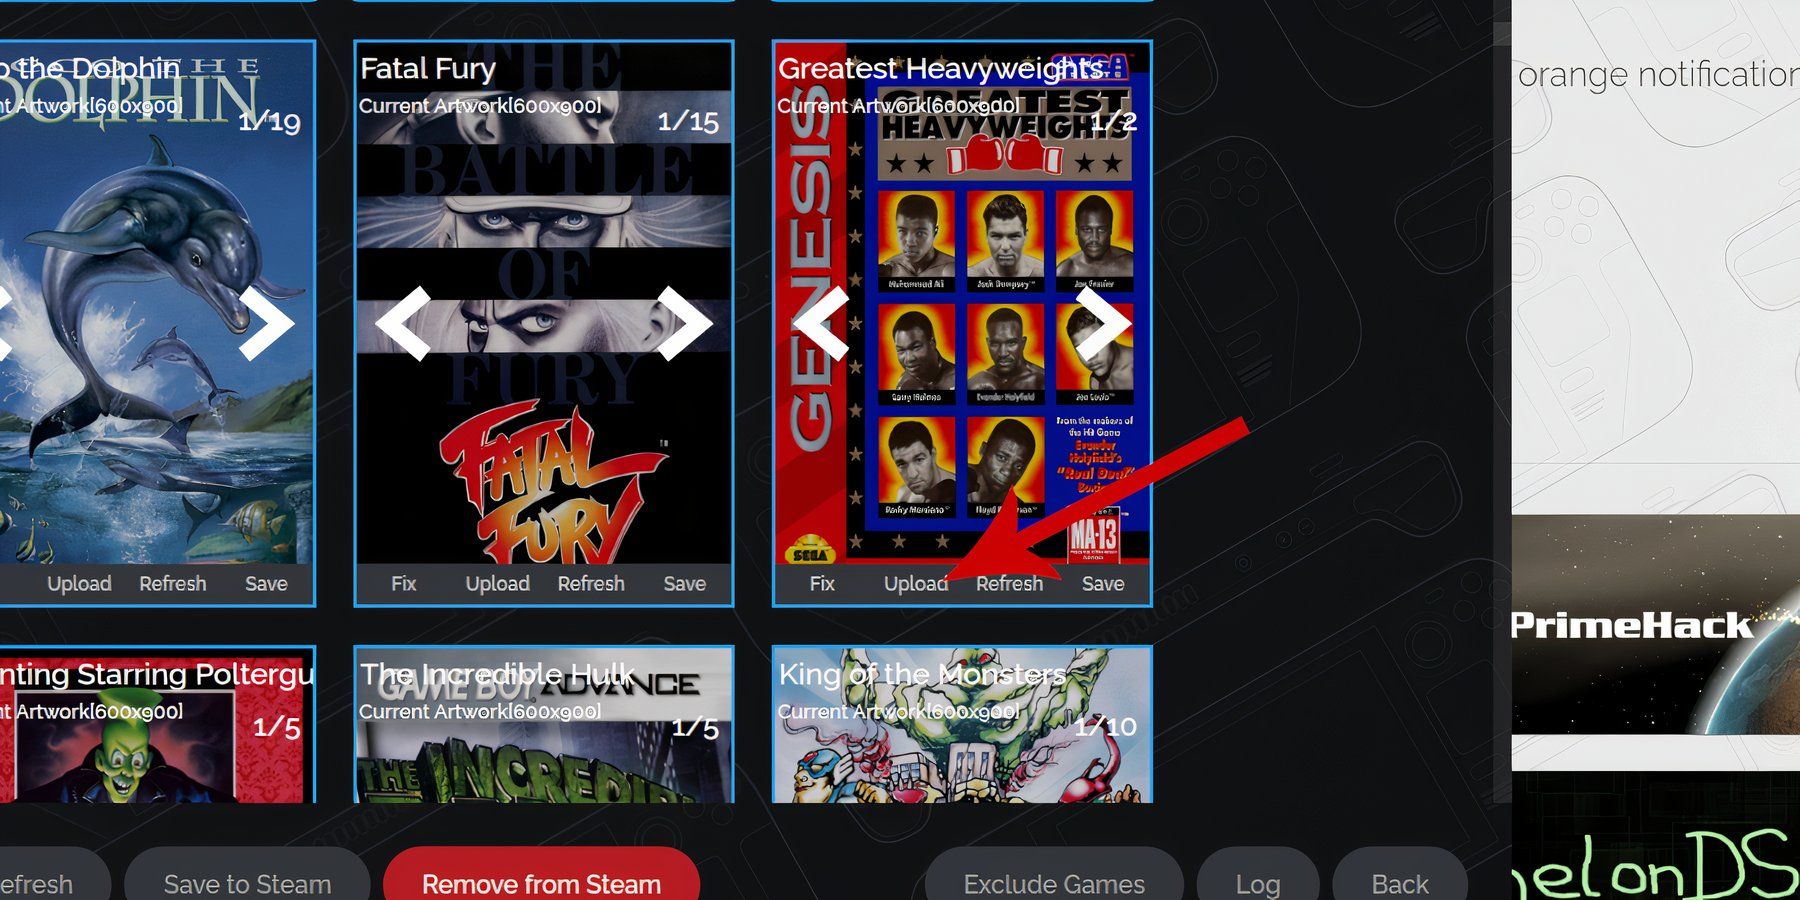 Uploading a Genesis cover image on the Steam Rom Manager